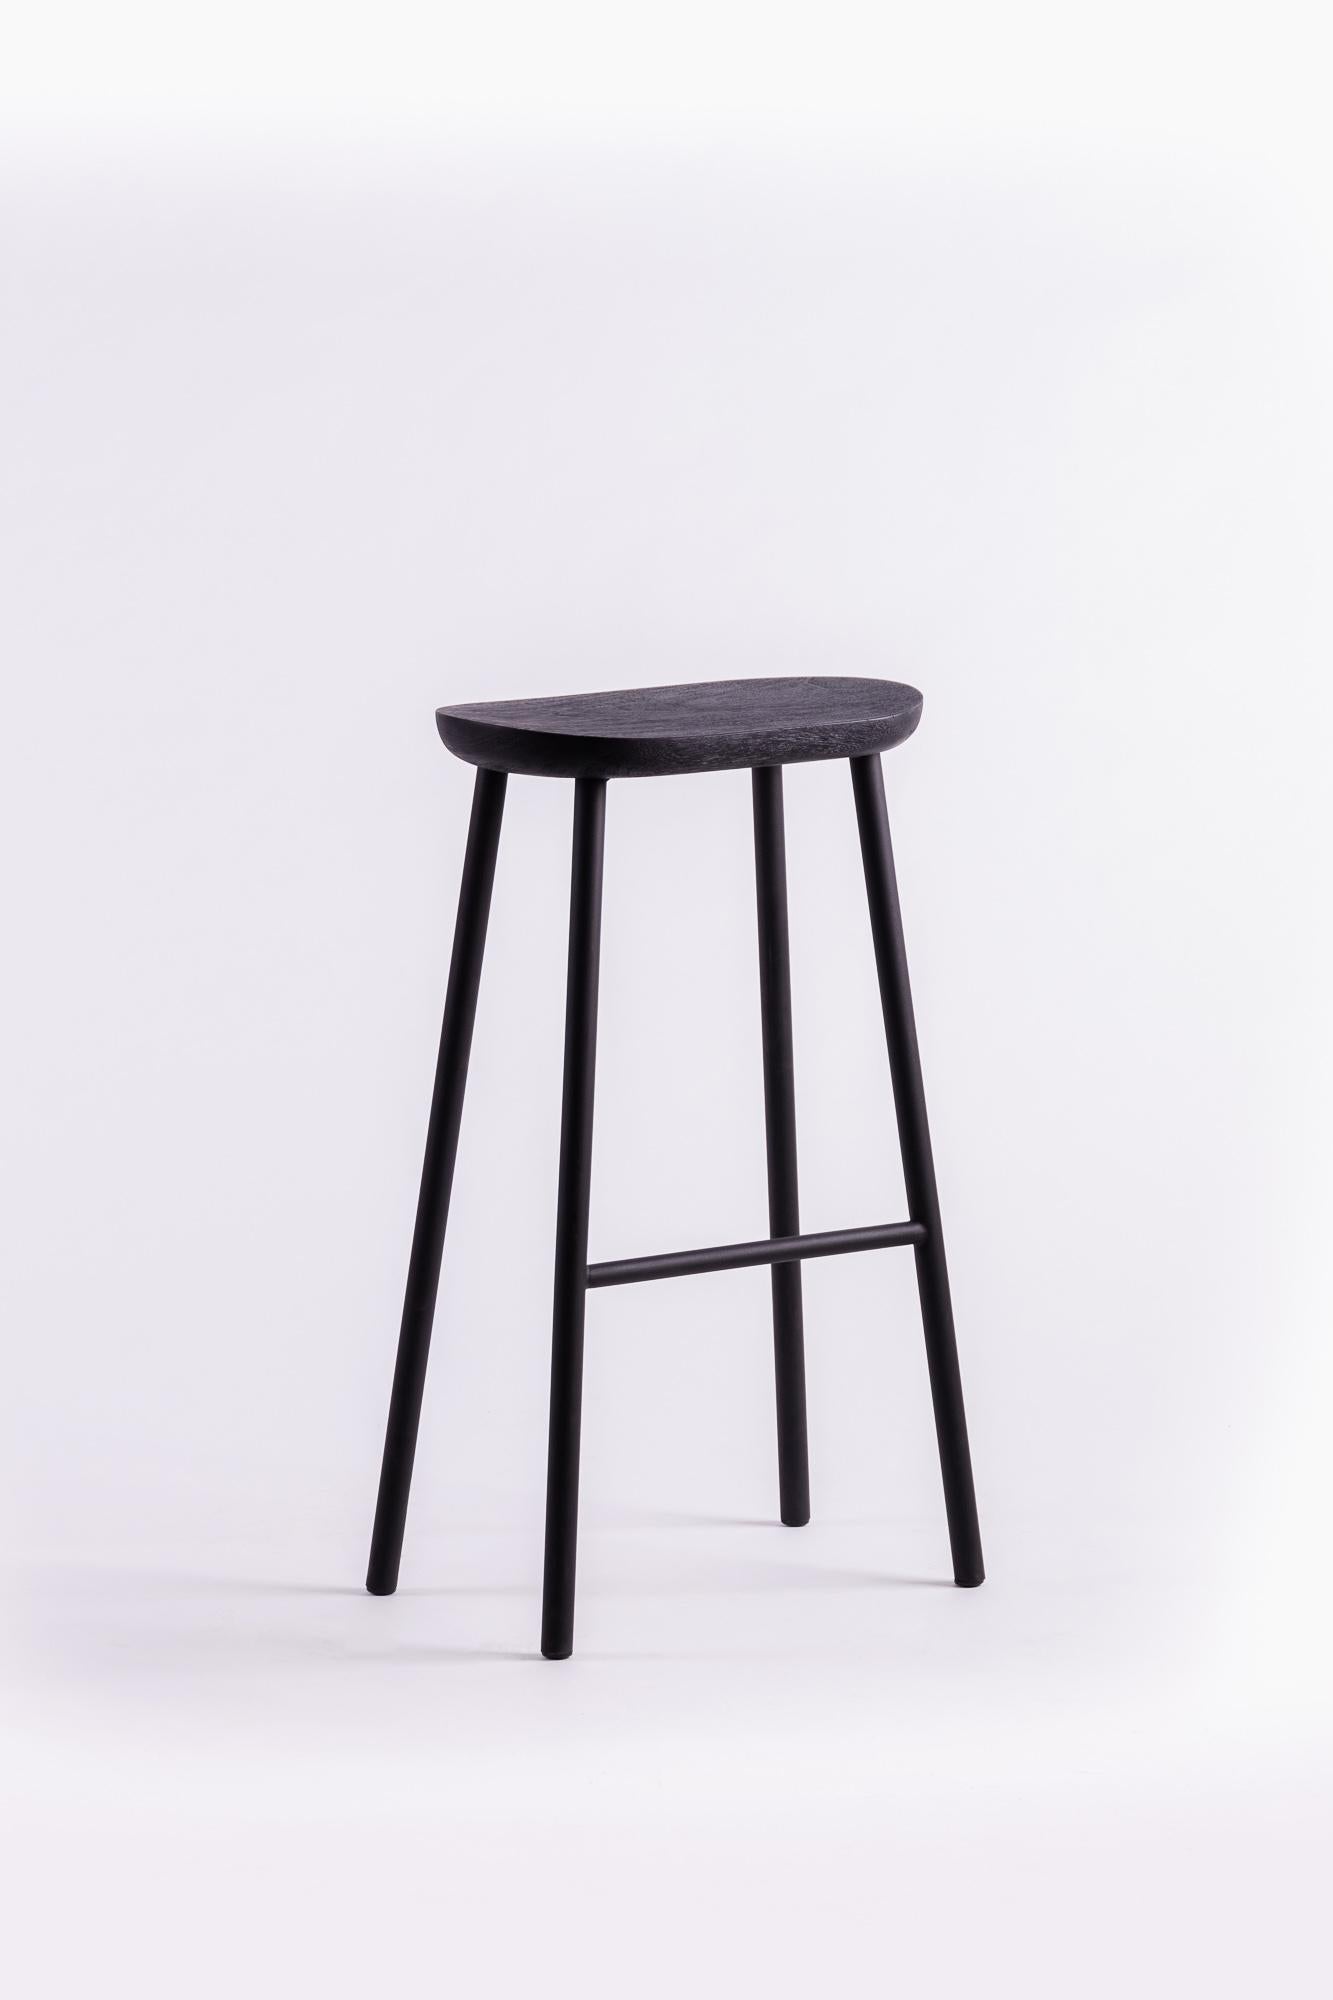 A minimal, humble stool stripped down to its essential structure. Material characteristics are honored with the fusion of wood and metal. With legs kept visually clean, this object blends in with your living space, creating absolute, long-lasting